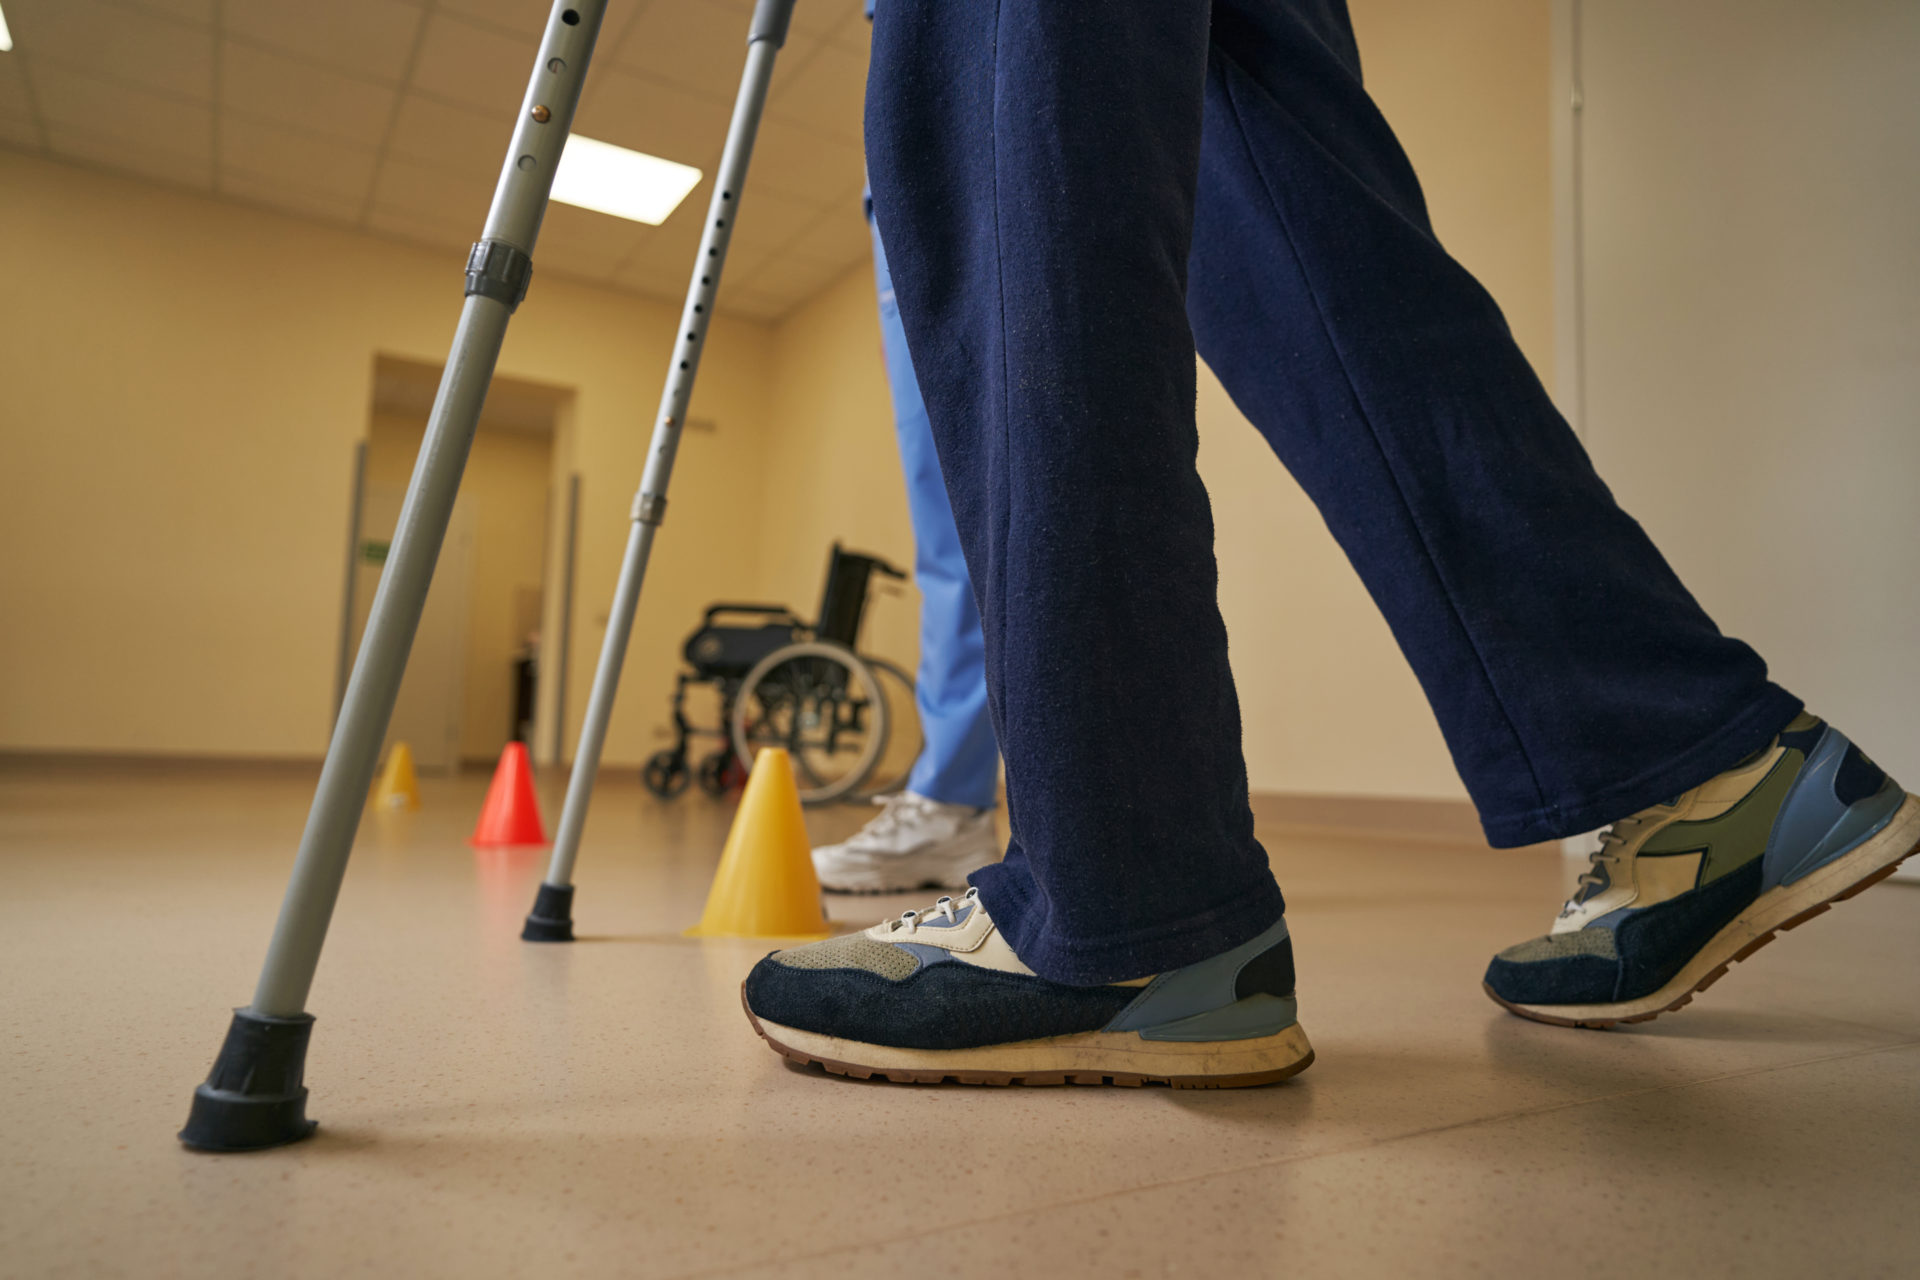 Client with physical disability using crutches during rehabilitation